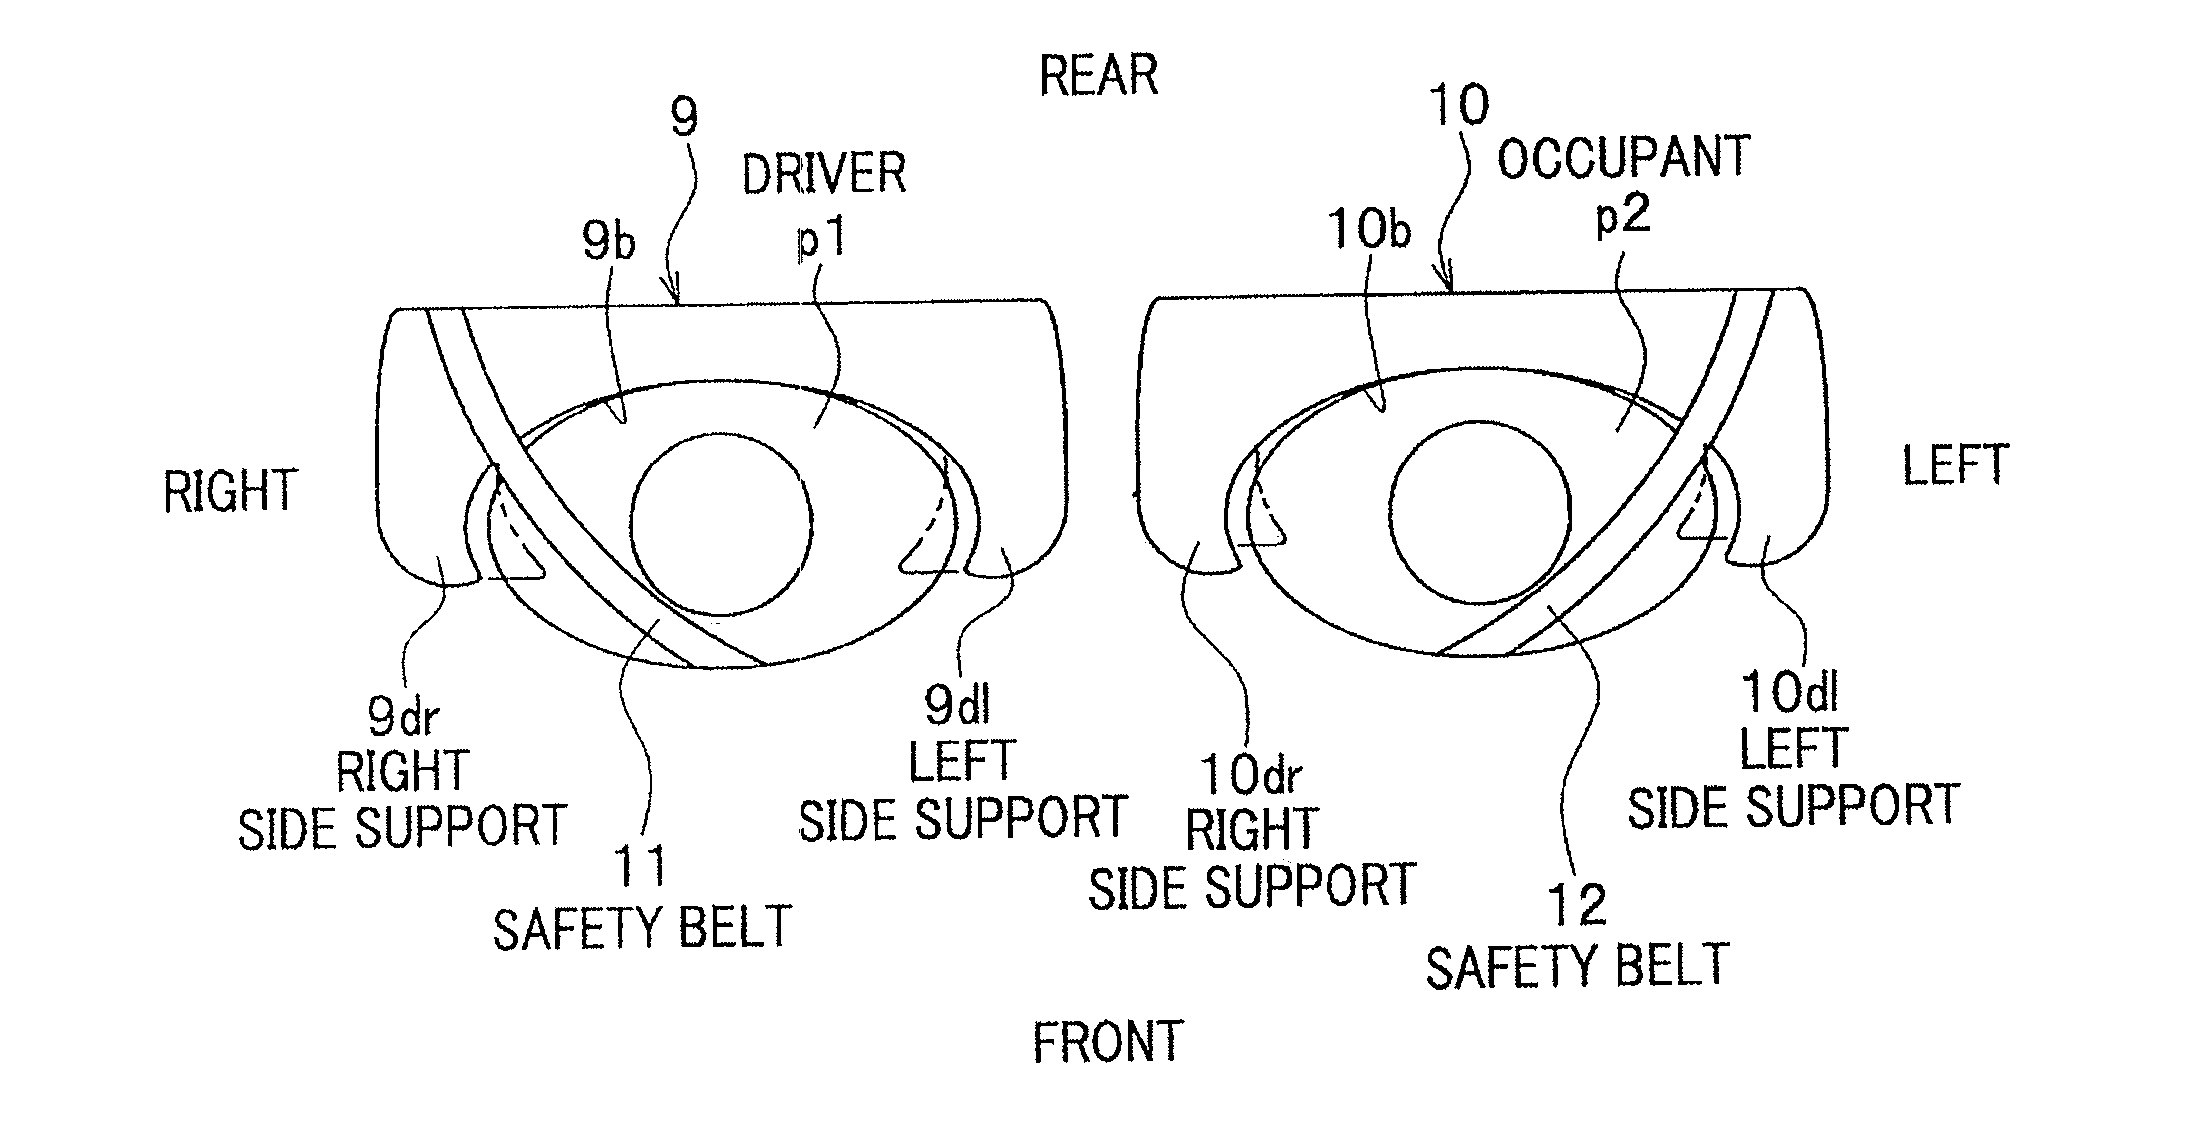 Passive safety device